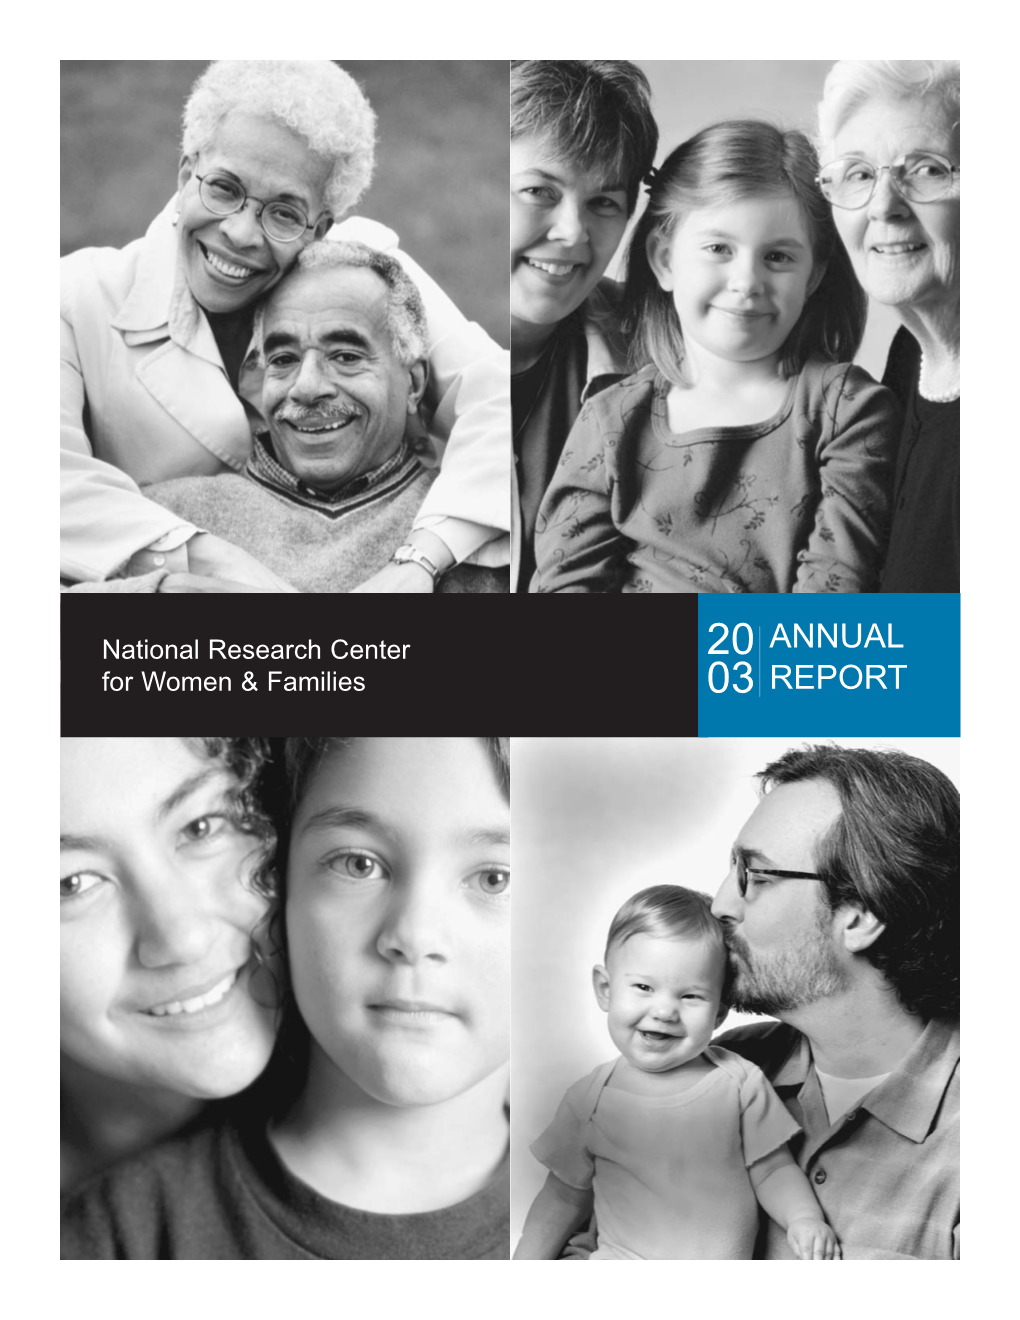 Annual Report Uses Our New Name, the National Research Center for Women & Families